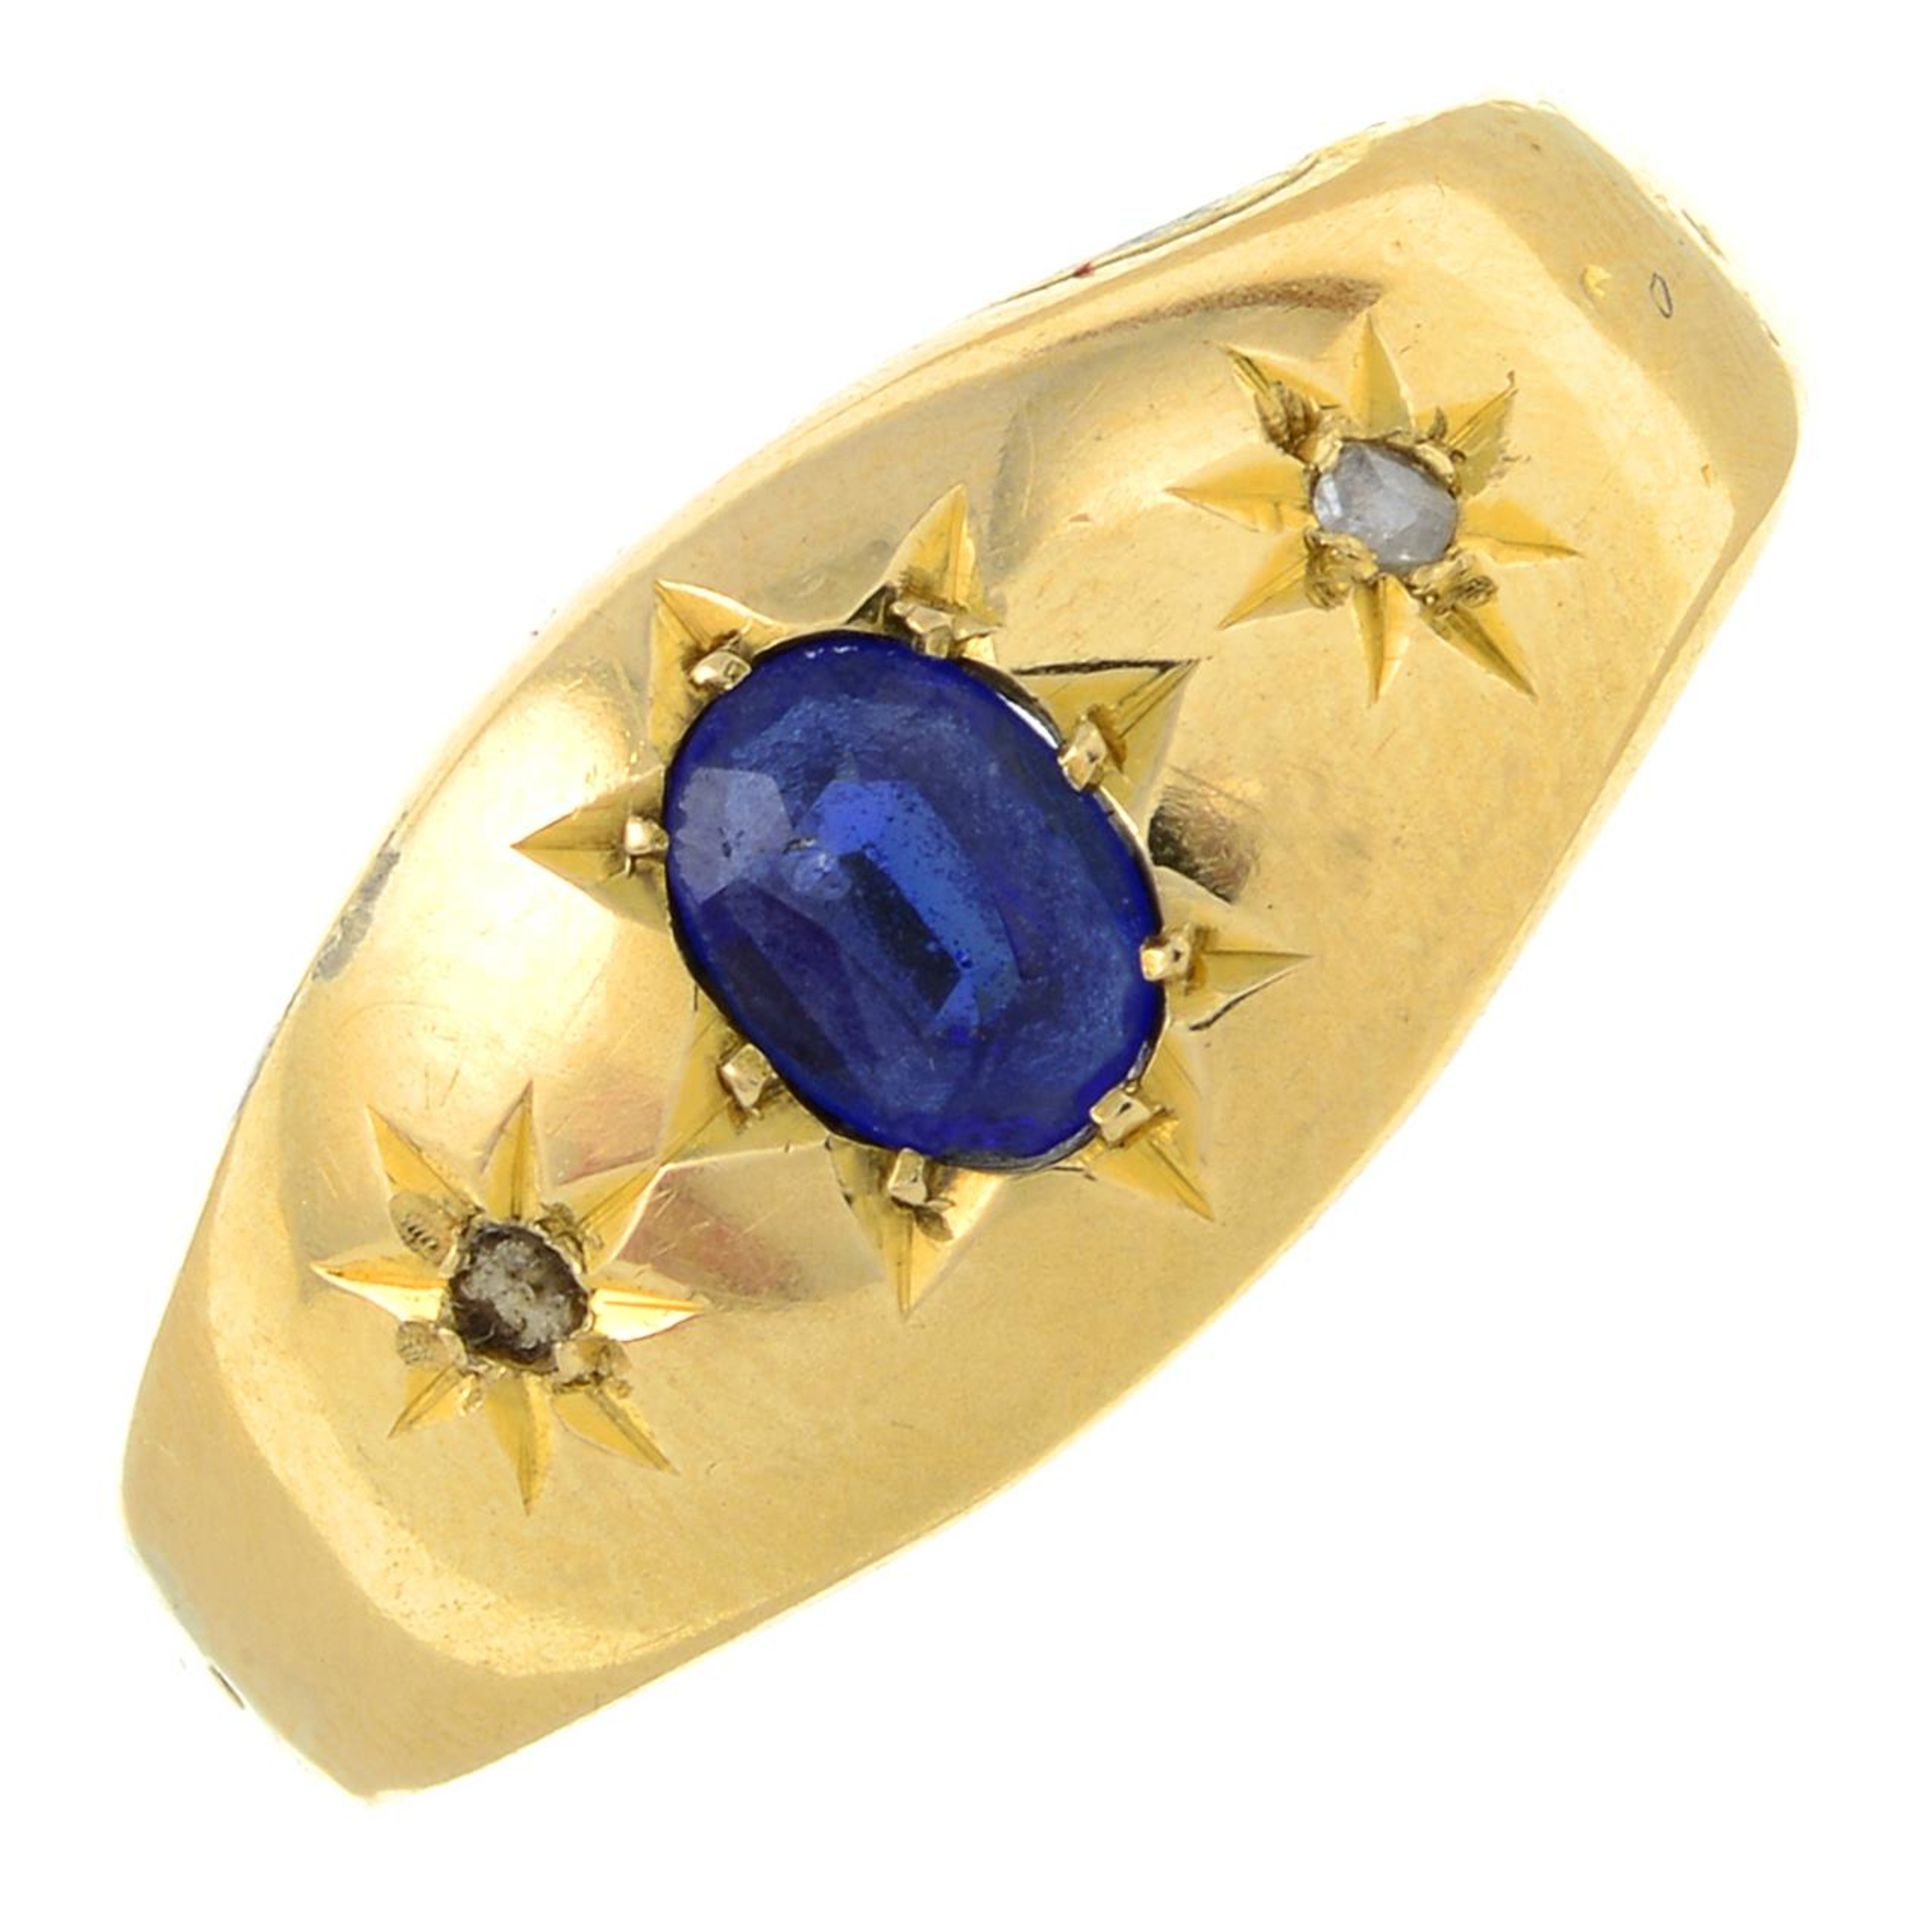 An early 20th century 18ct gold blue garnet-topped-doublet and rose-cut diamond three-stone